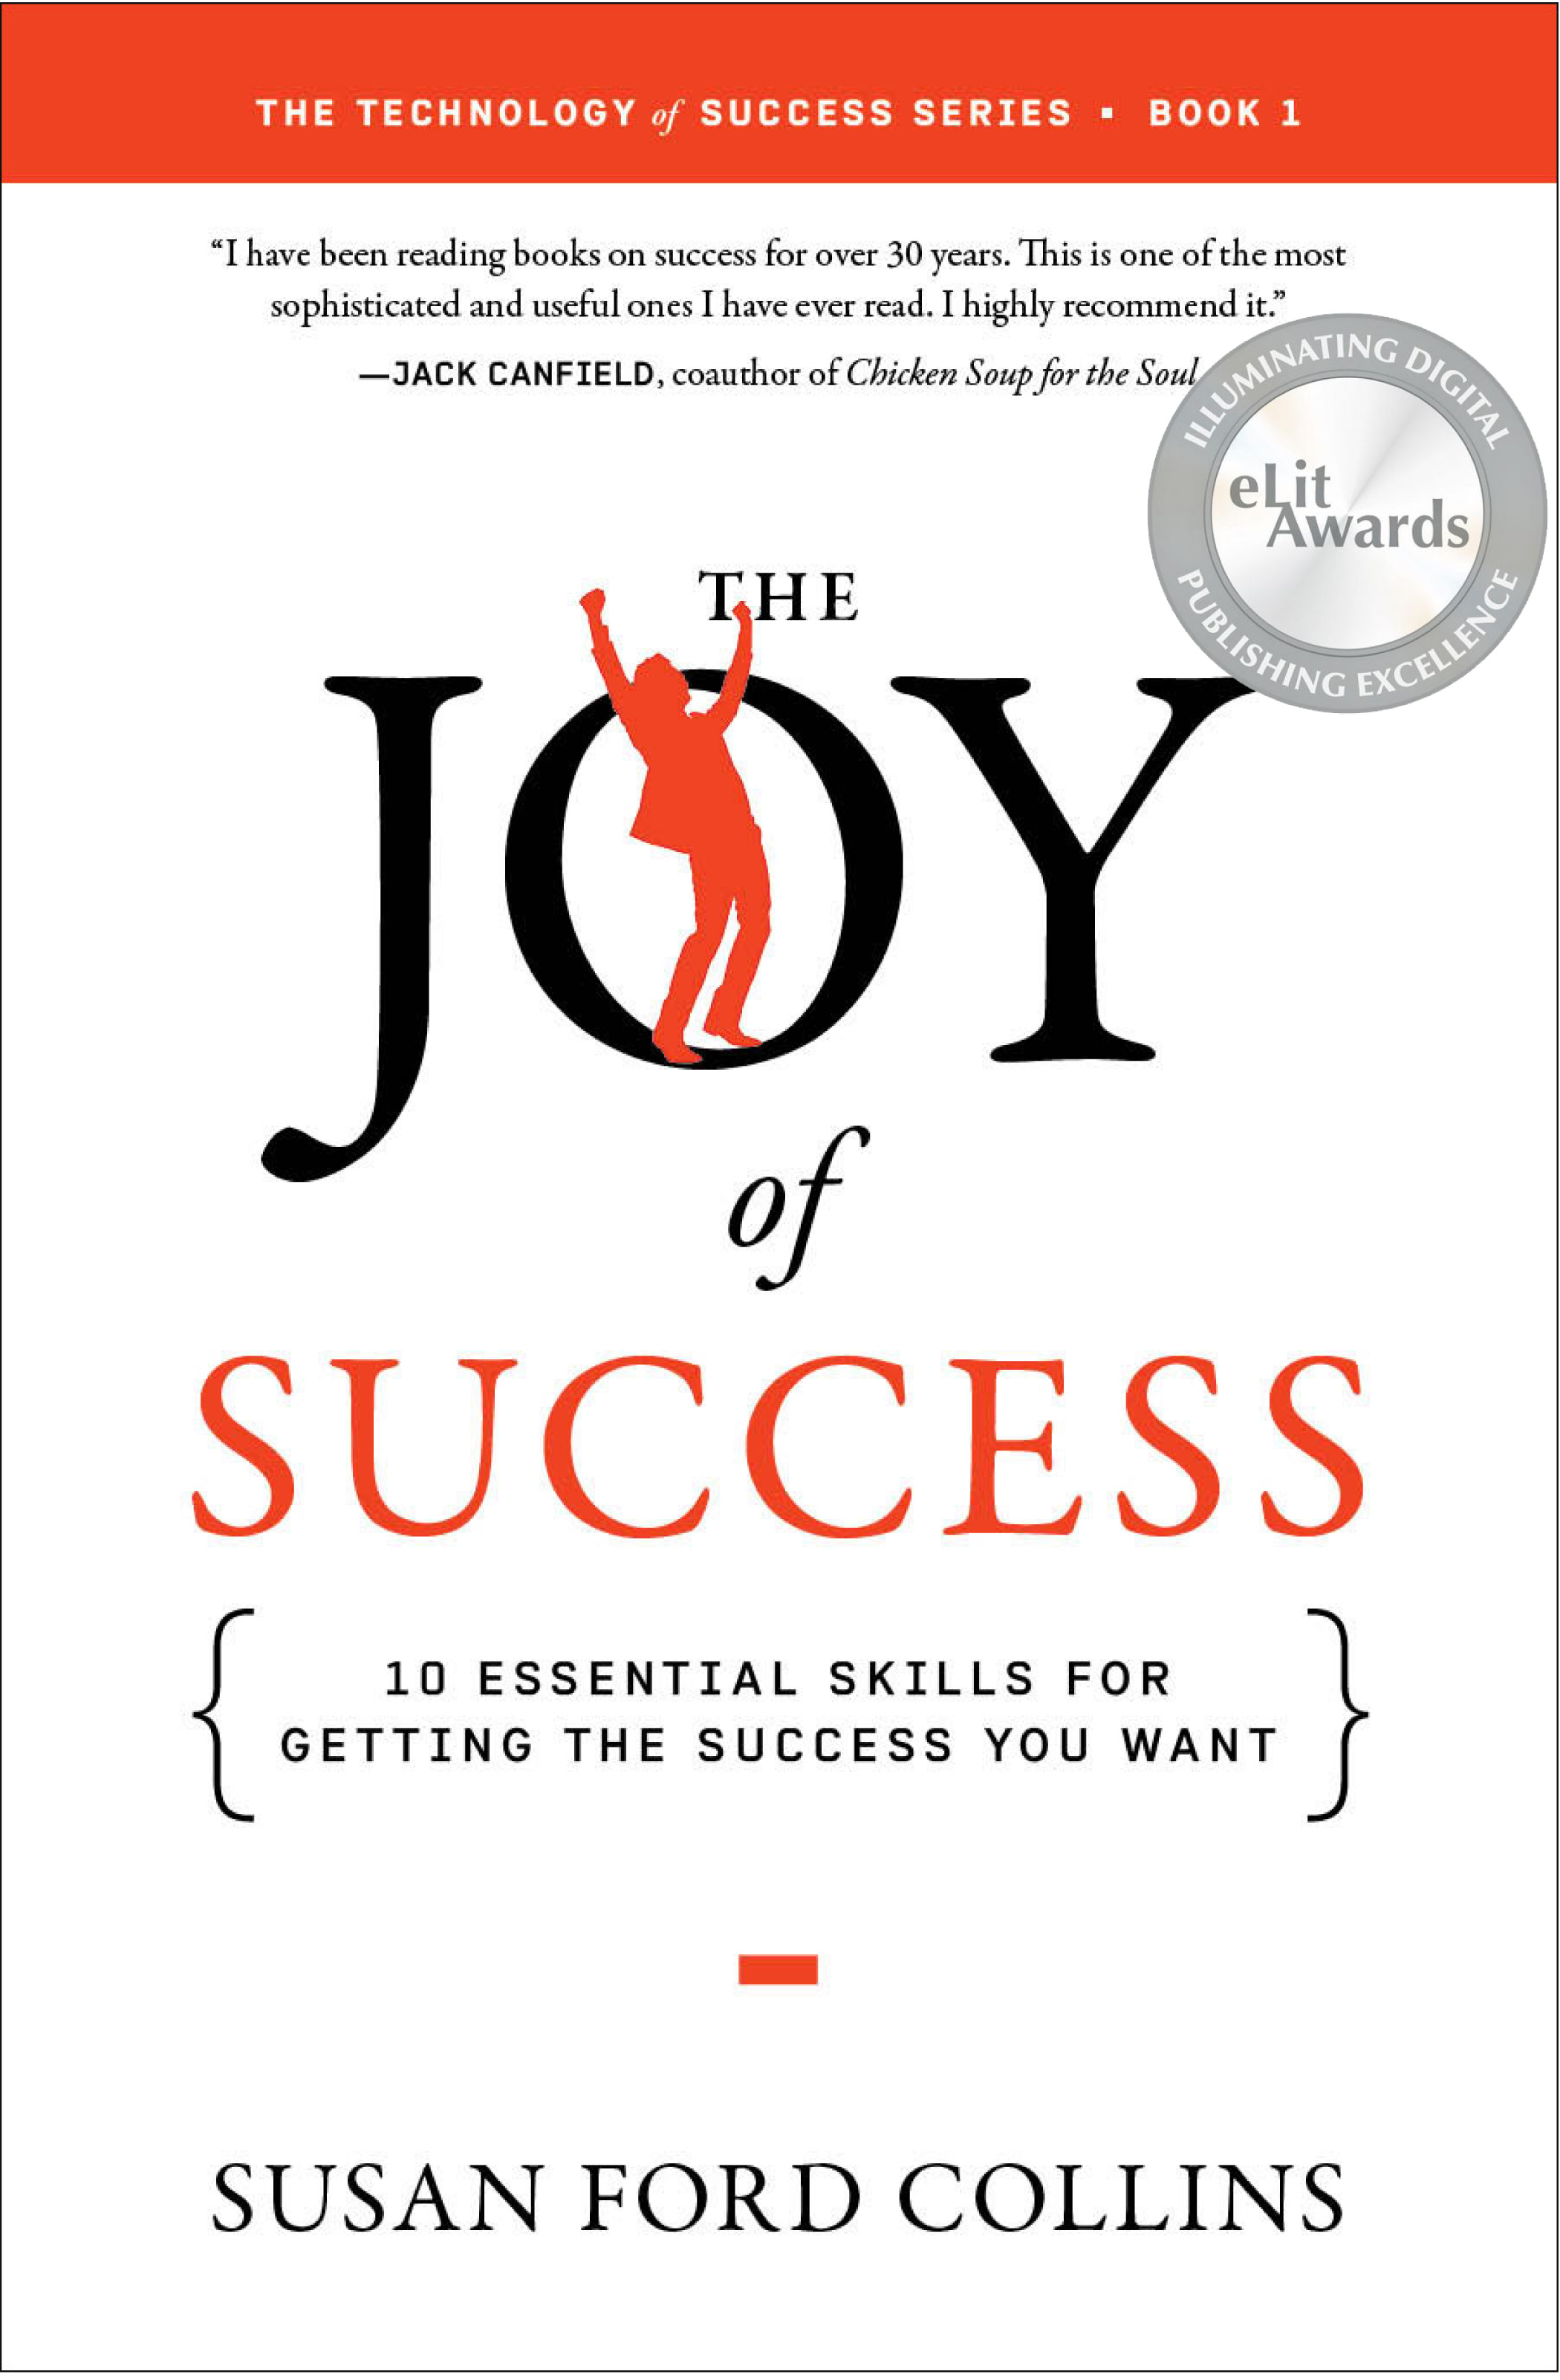 Copy of The Joy of Success by Susan Ford Collins